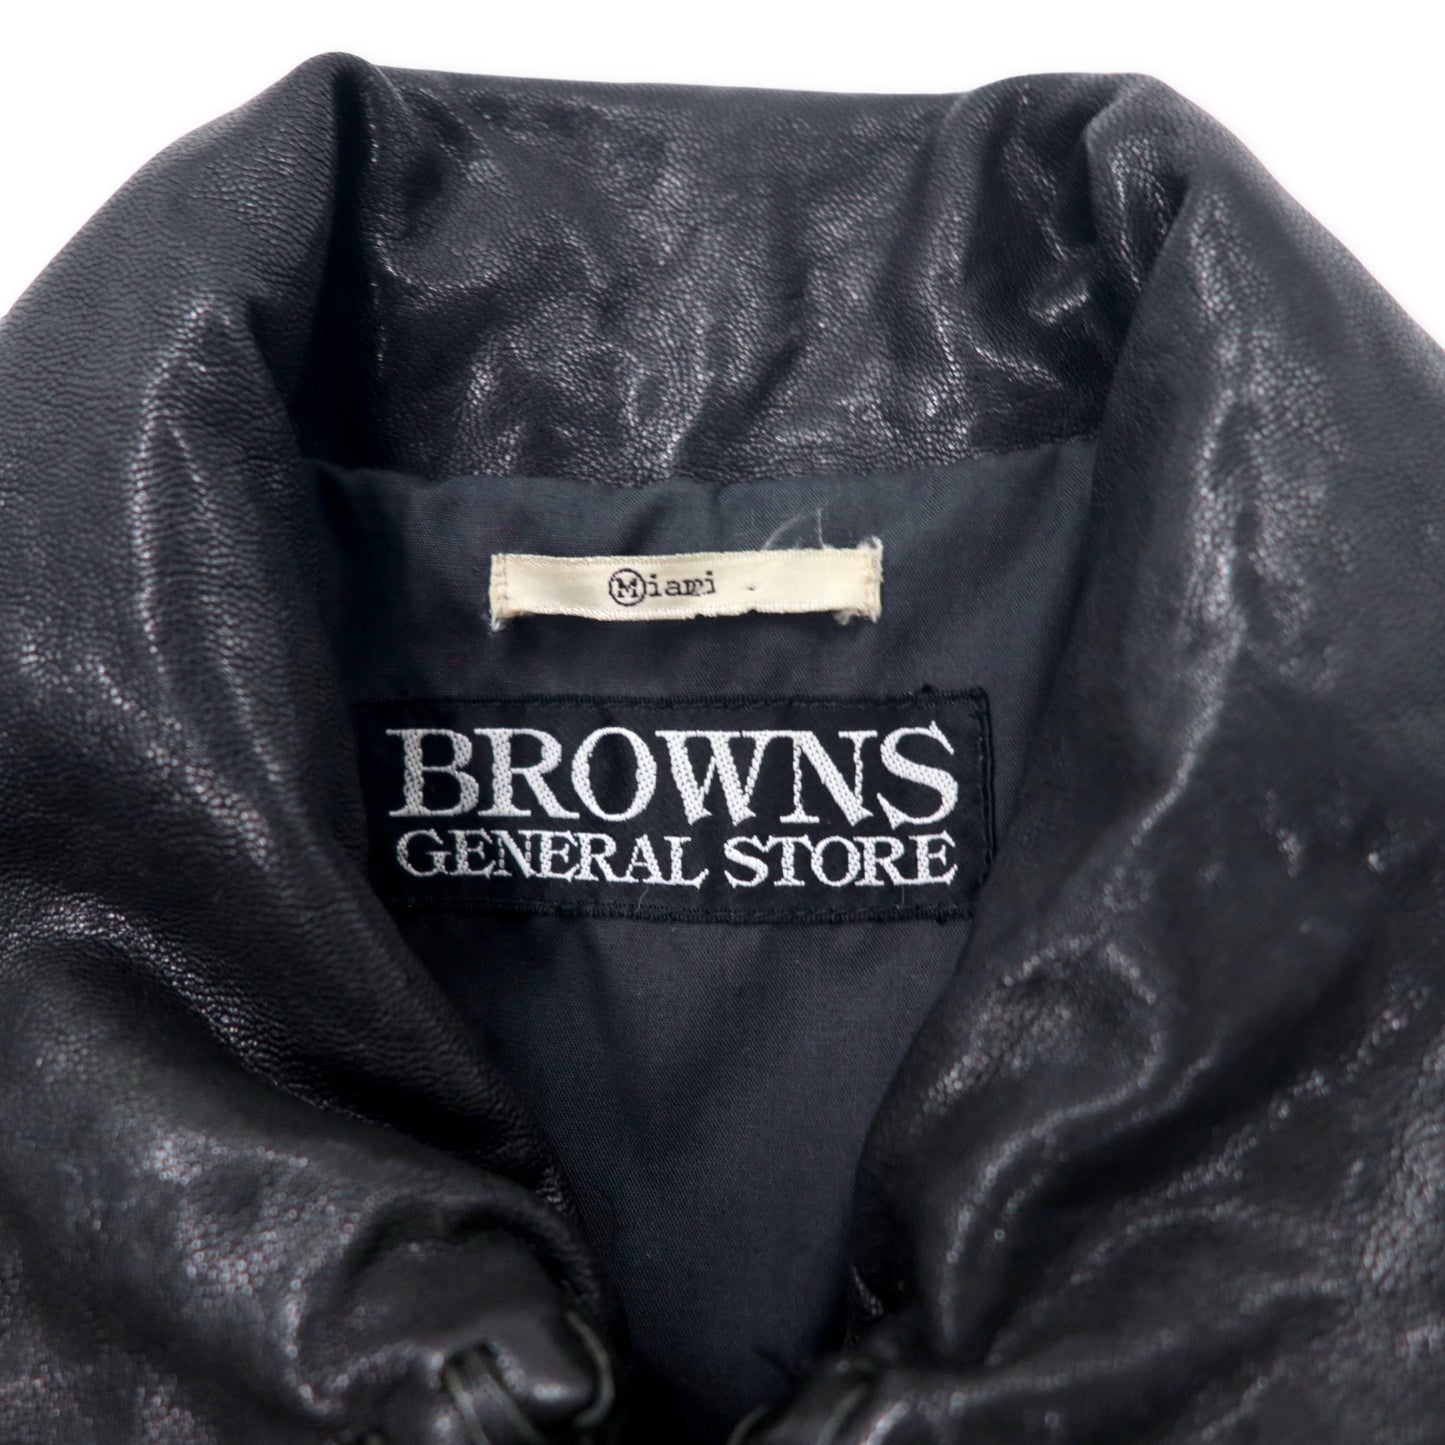 BROWNS GENERAL STORE Gote Leather Riders Jacket M Black Goal